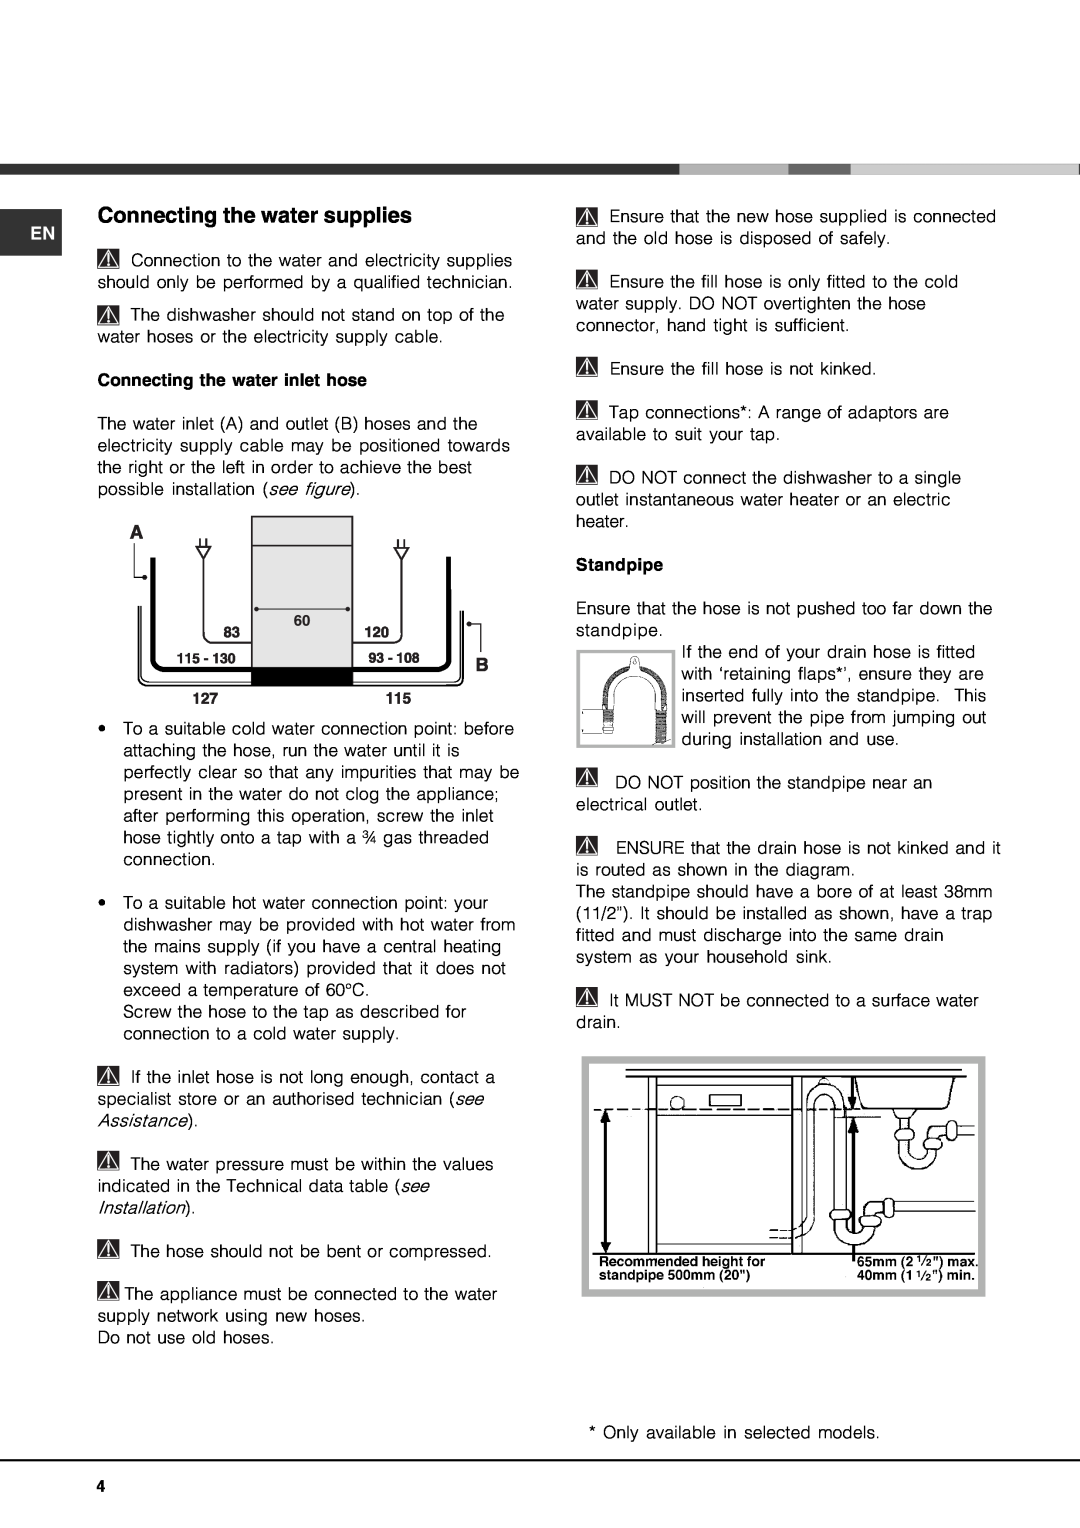 Hotpoint LFT 321 manual Connecting the water supplies 